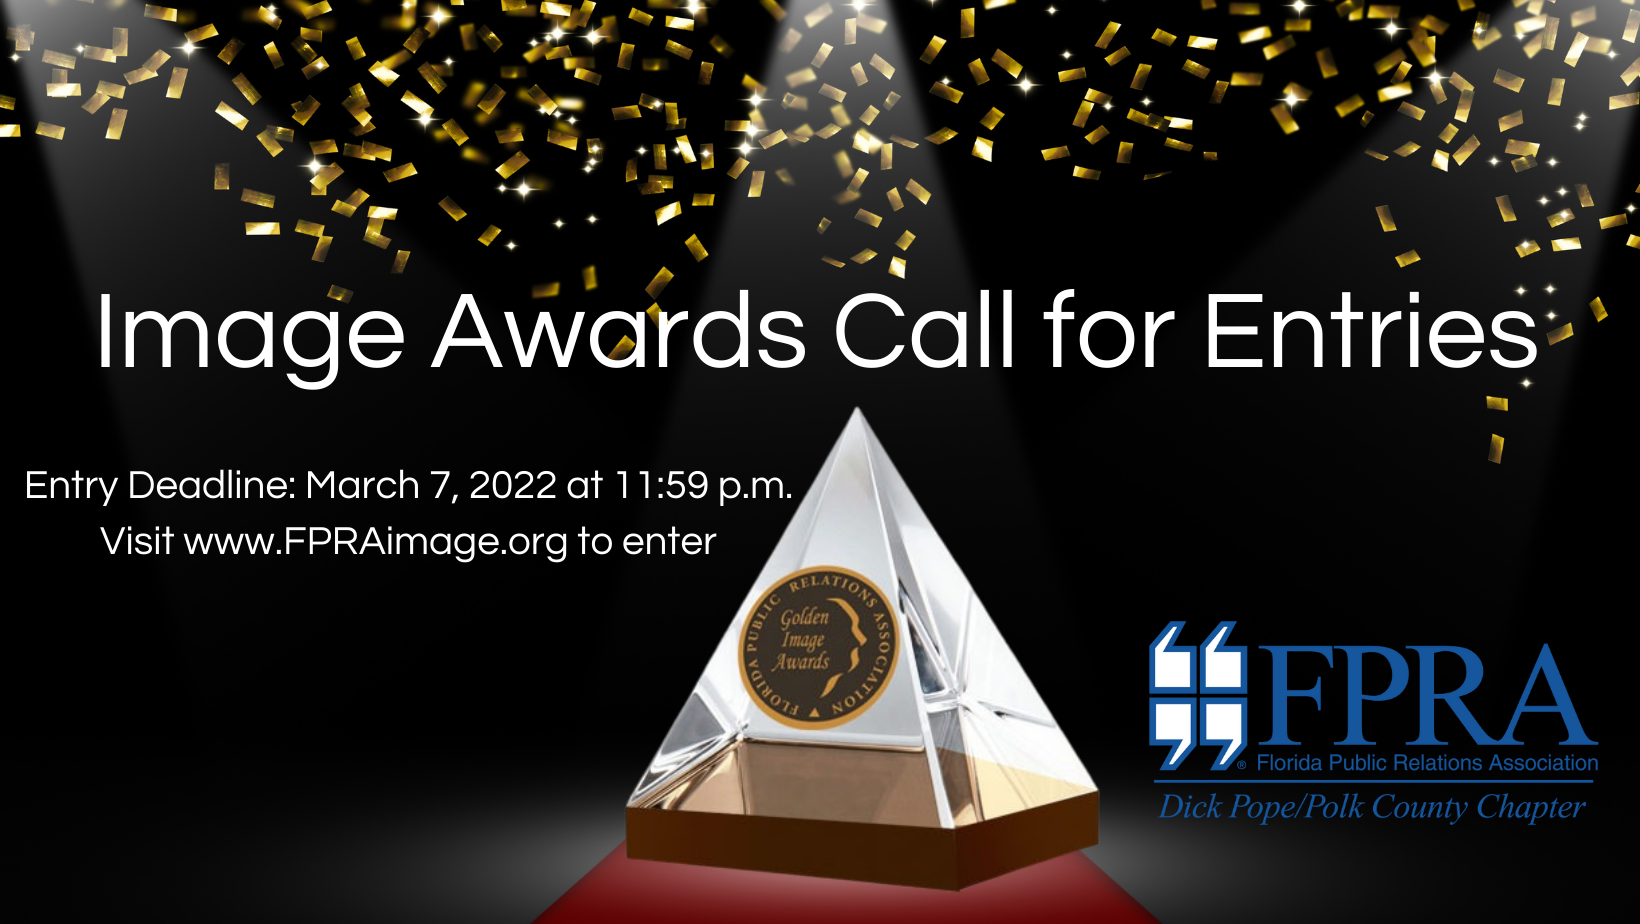 Image awards call for entries